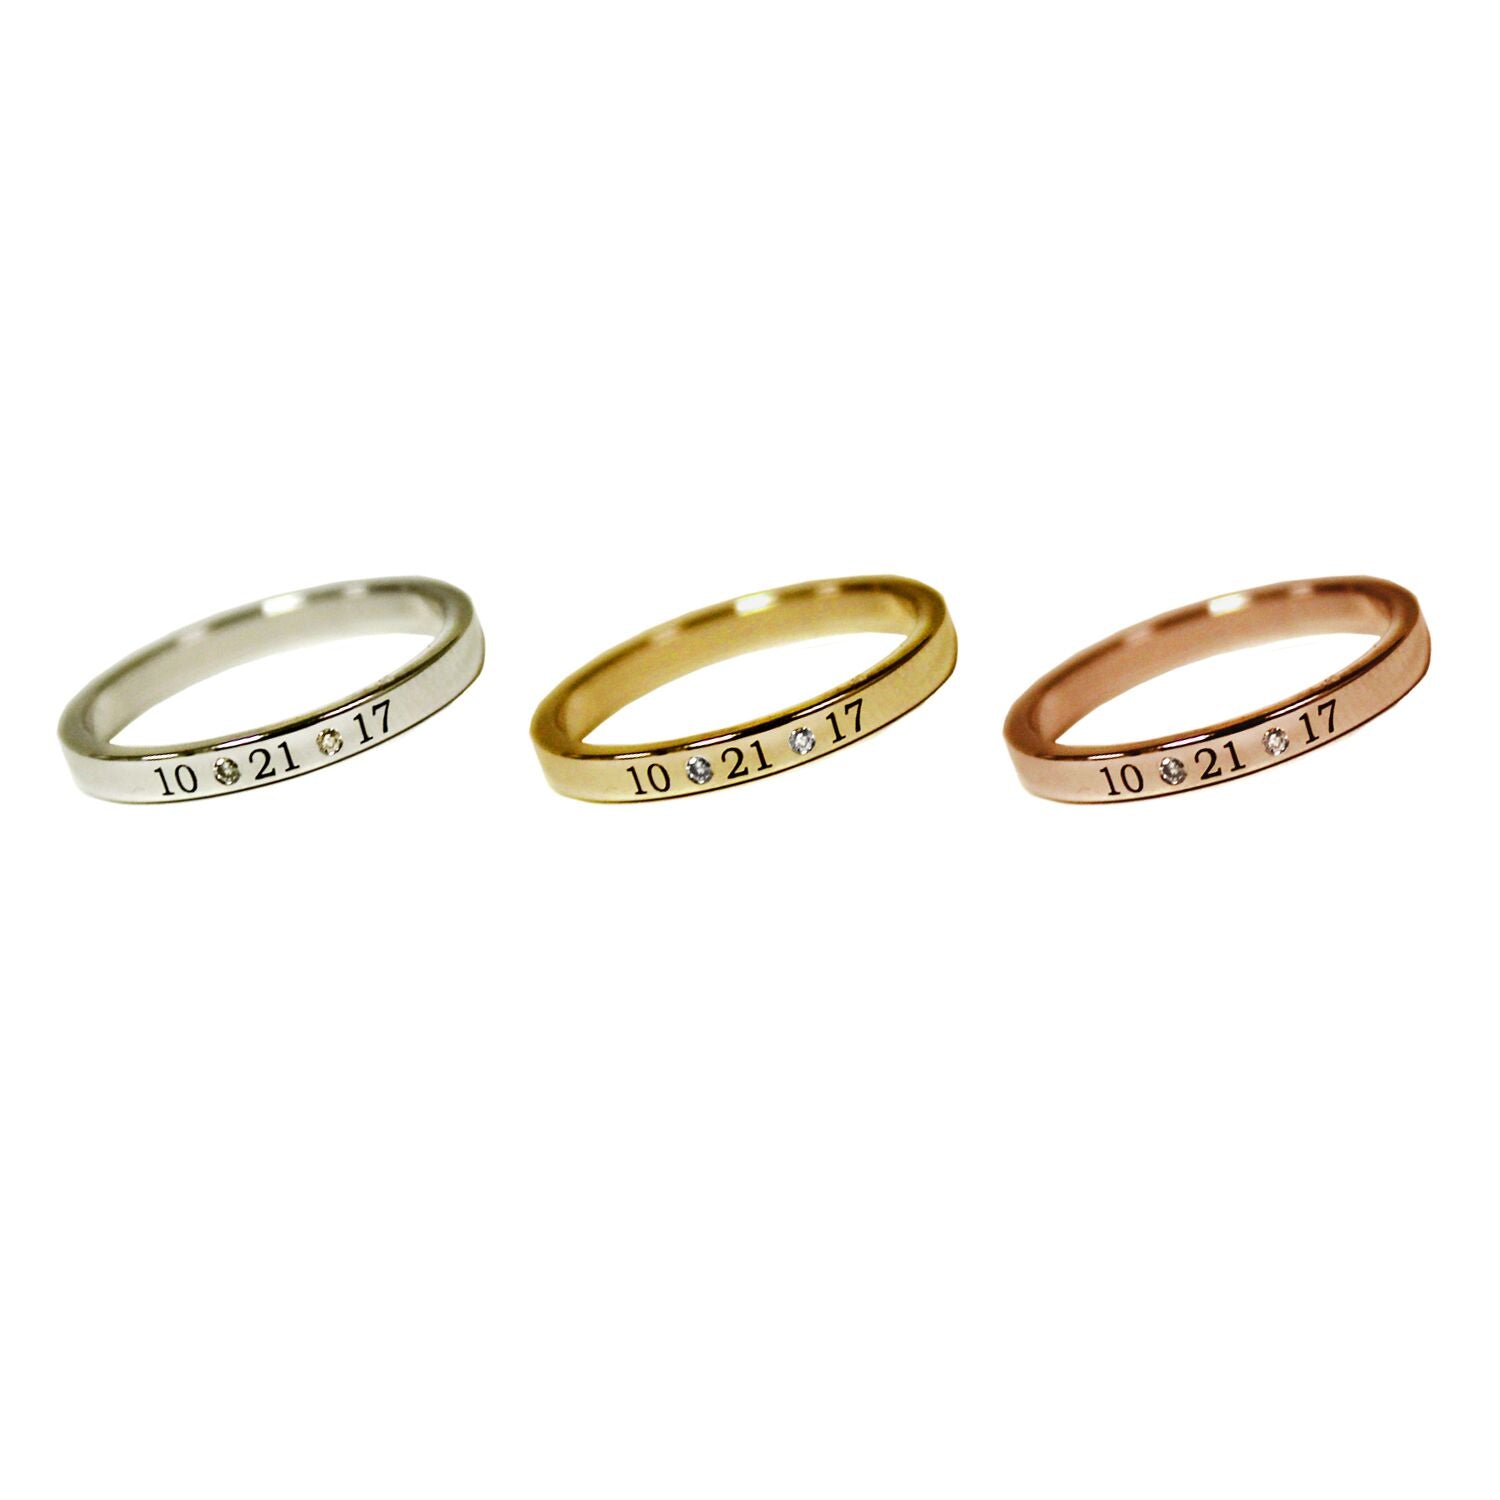 Personalized Gold Band